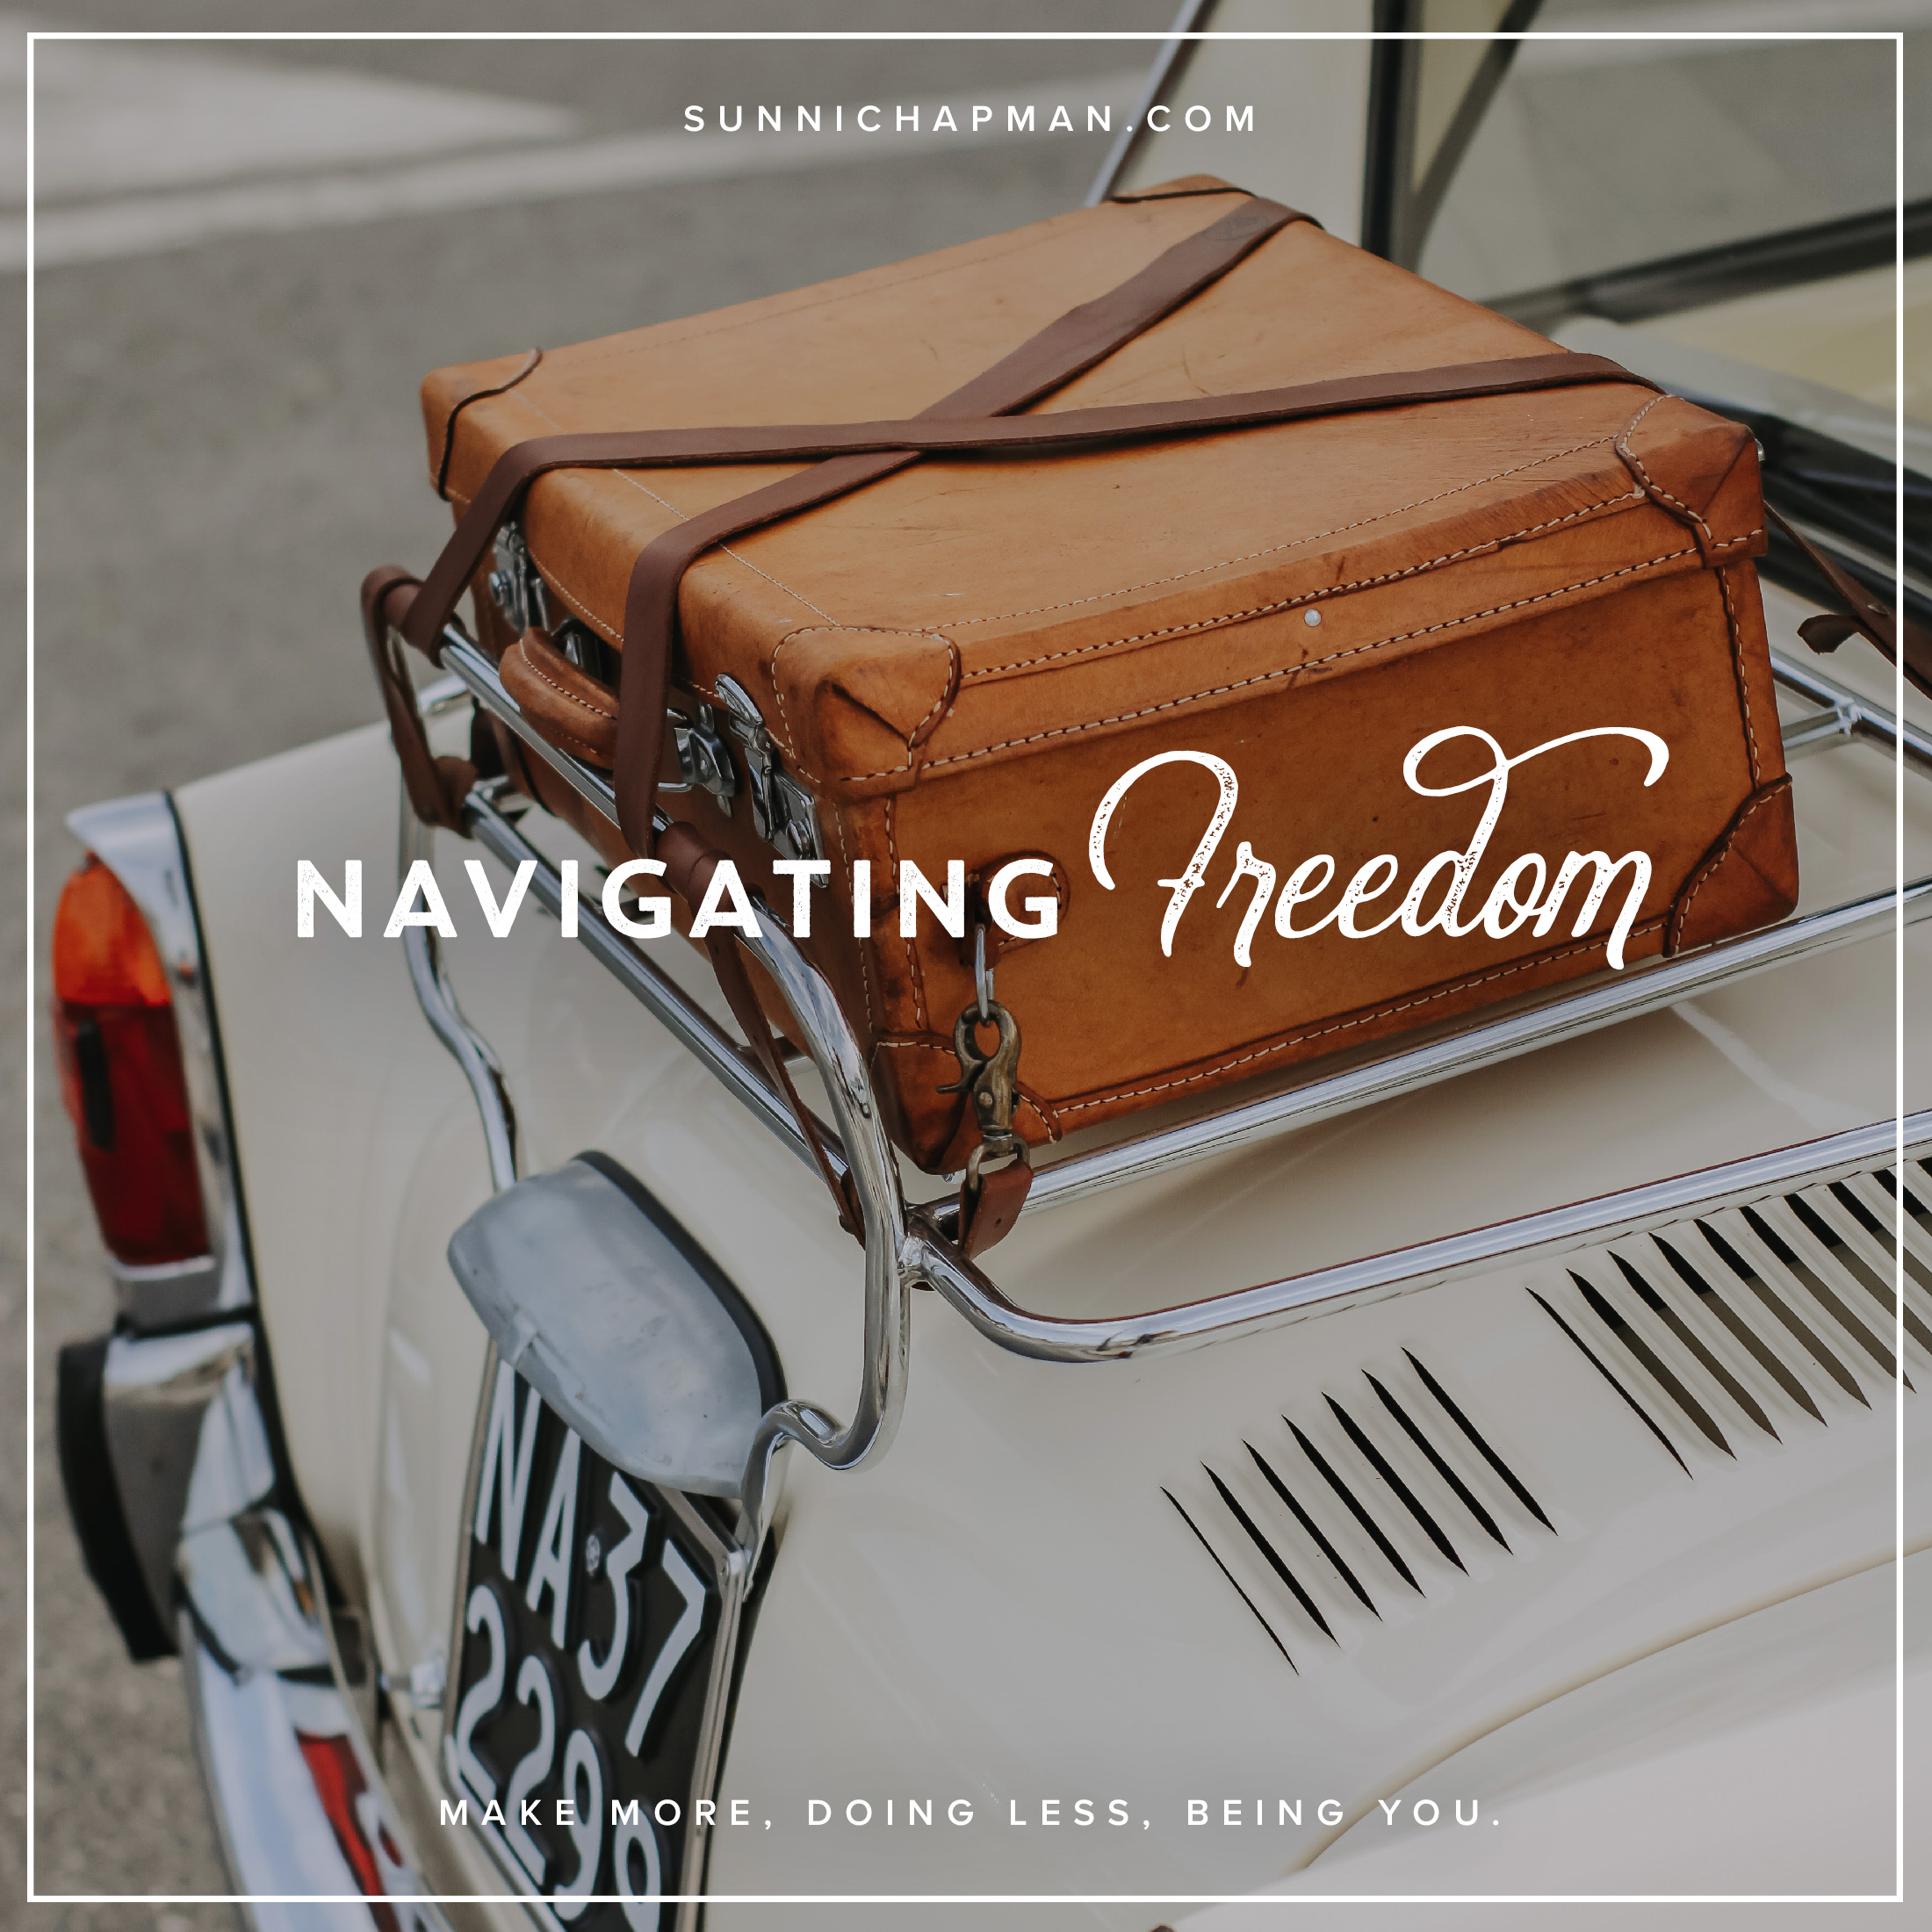 Brown suitcase tight up to the back of the car, and text: Navigating Freedom